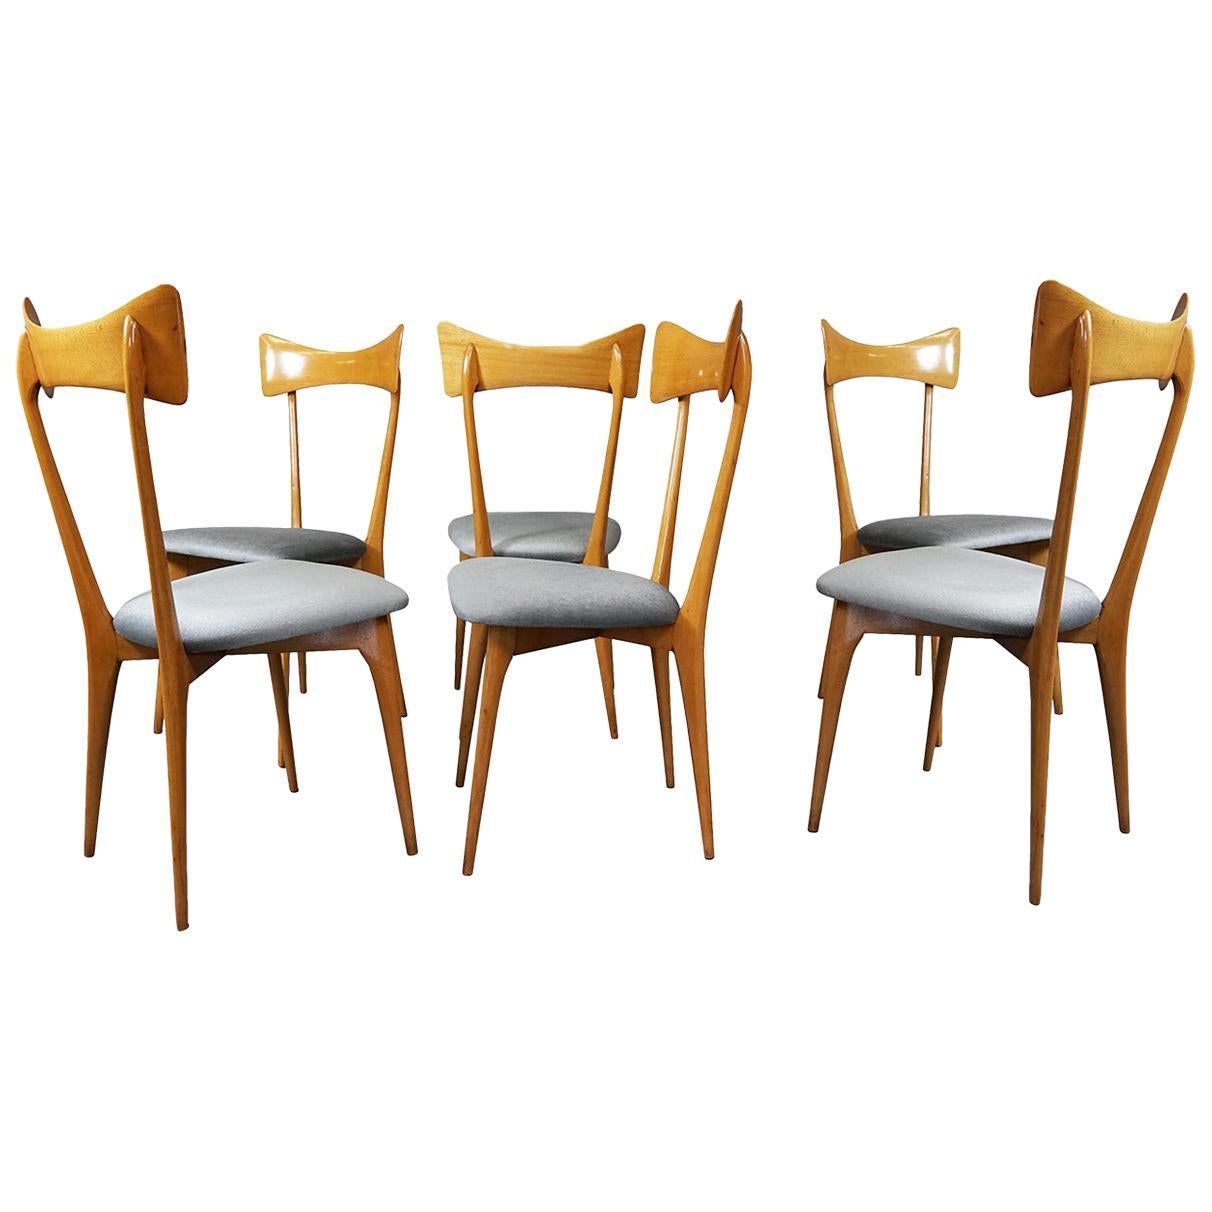 Set of Six Chairs by Luisa & Ico Parisi, Colombo Cantú, Italy, 1945